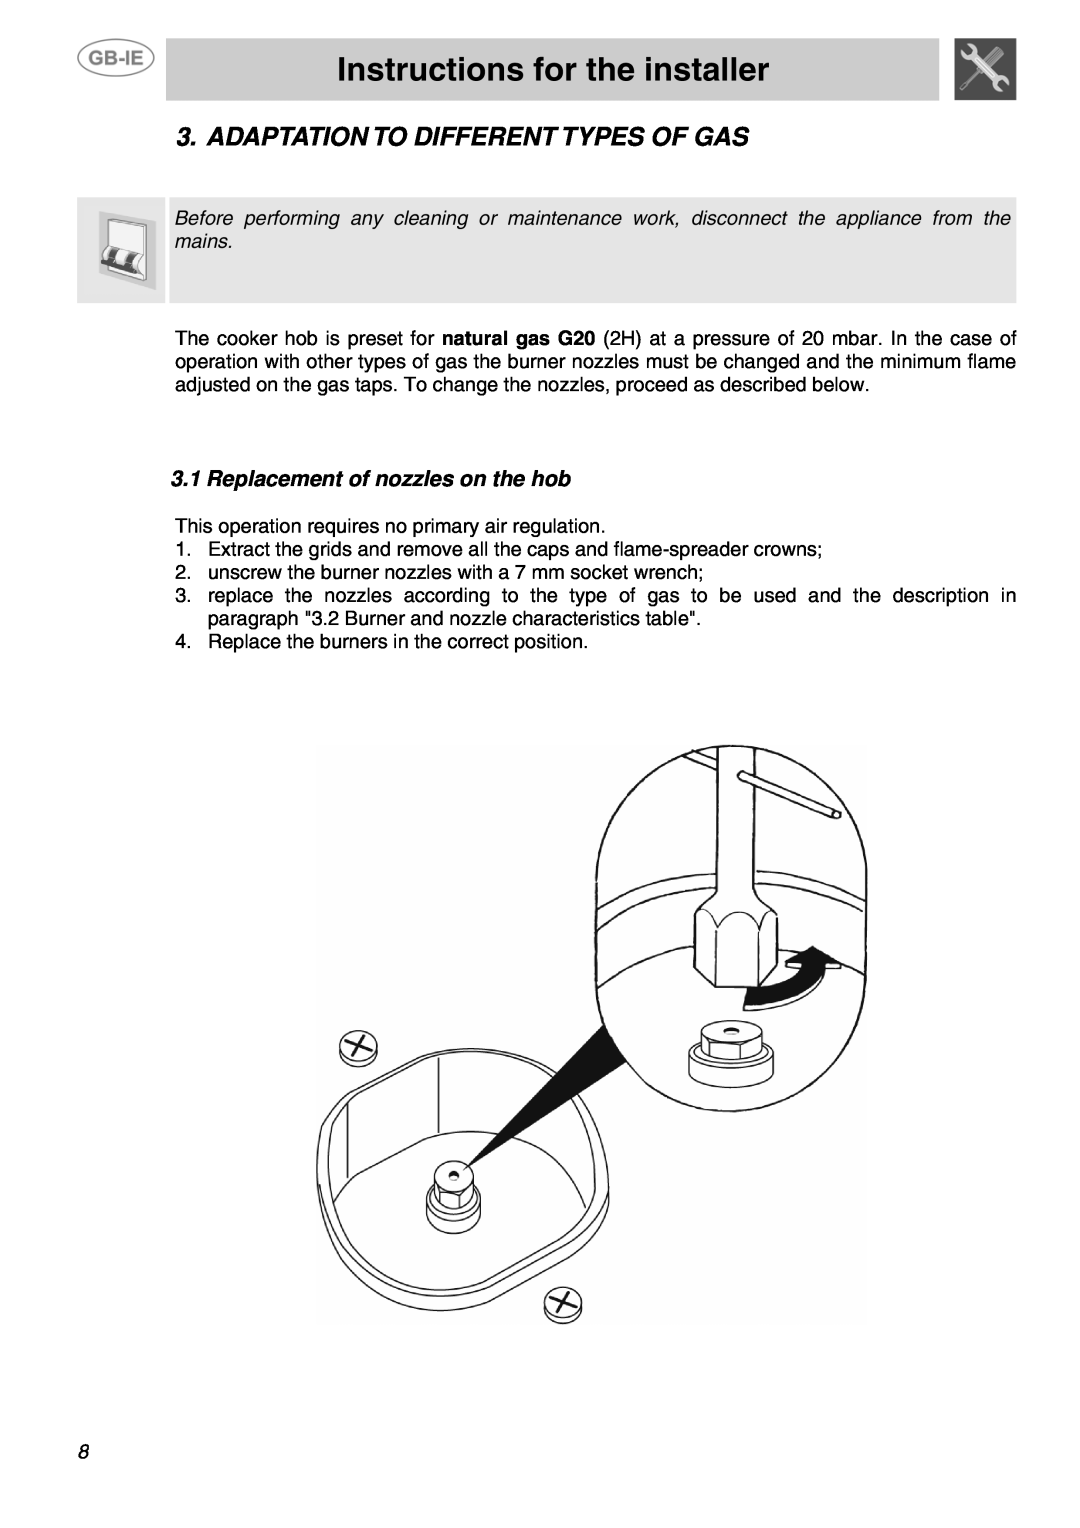 Smeg SUK81MFX Adaptation To Different Types Of Gas, Replacement of nozzles on the hob, Instructions for the installer 